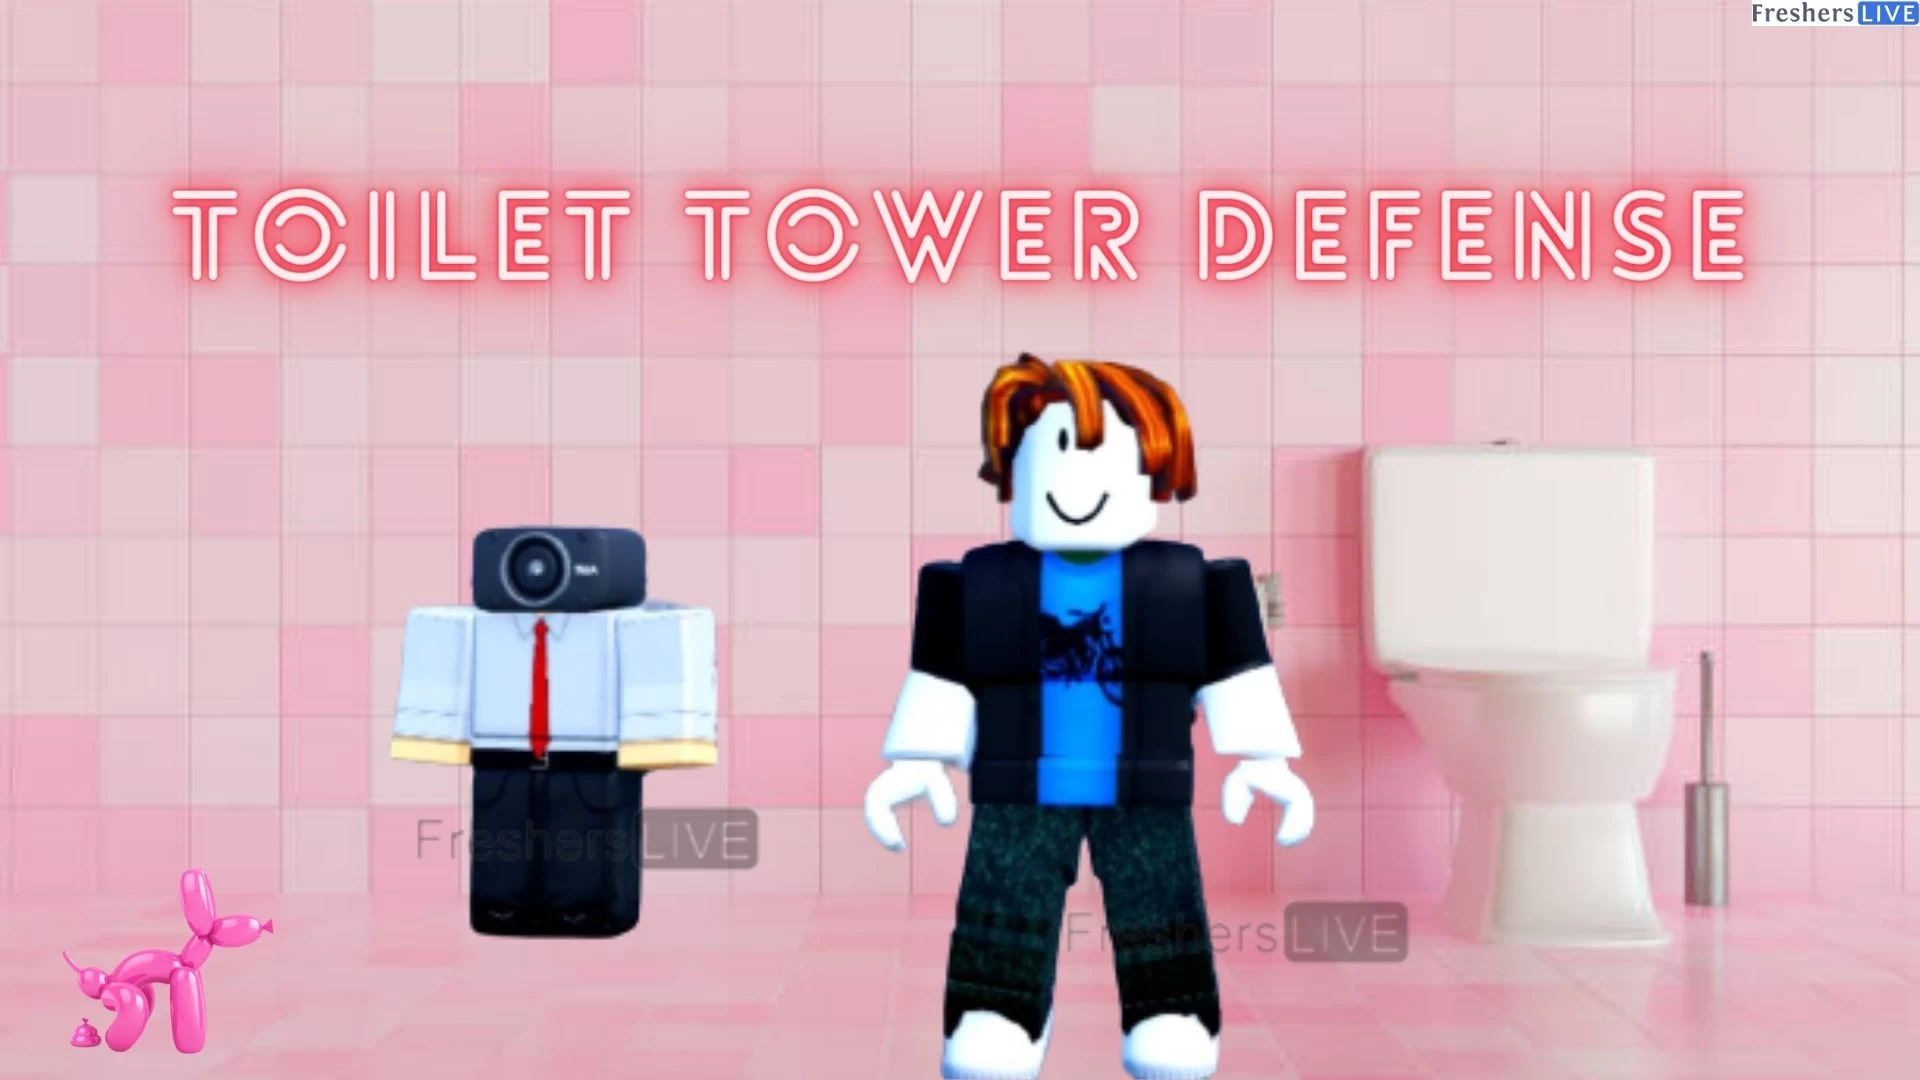 What Happened to Toilet Tower Defense? Is Toilet Tower Defense Deleted?